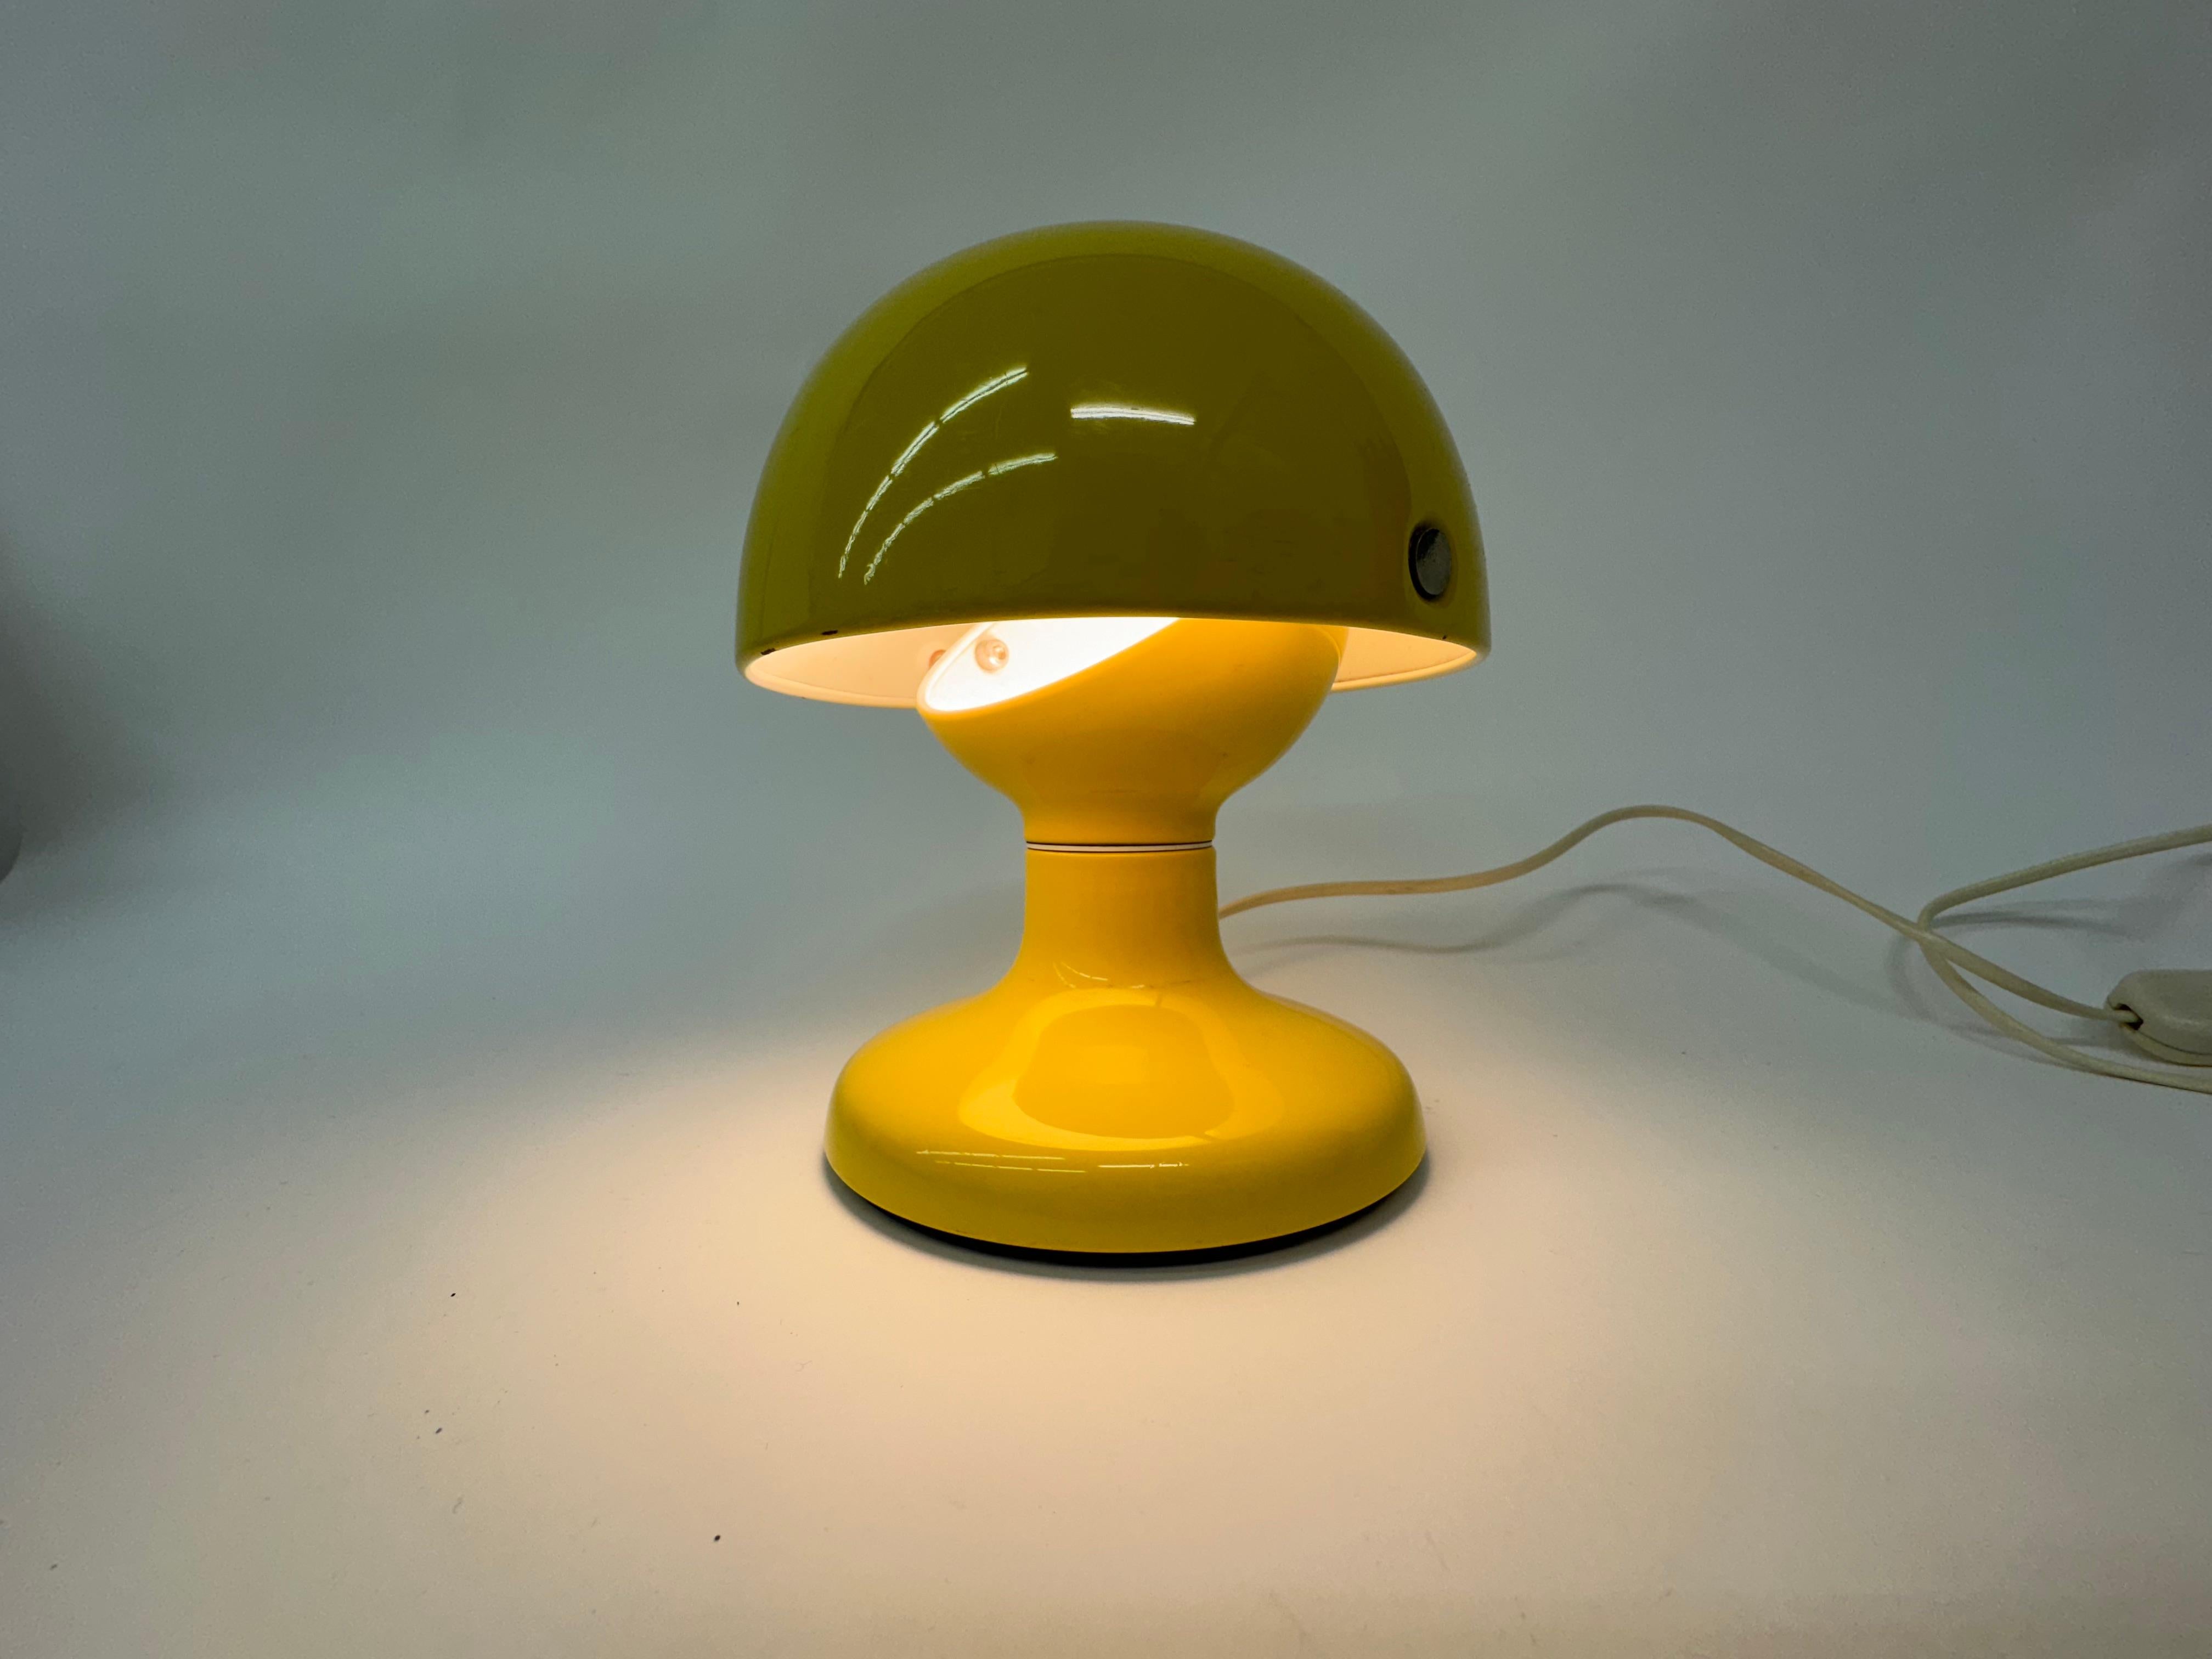 Mid-Century Design ‘Jucker’ table lamp by Tobia Scarpa for Flos , Italy ,1960’s

Dimensions: 18cm Diameter, 21cmH
Period: 1960’s
Color: Yellow
Material: Metal
Designer: Tobia Scarpa
Manufacturer: Flos
Origin: Italy